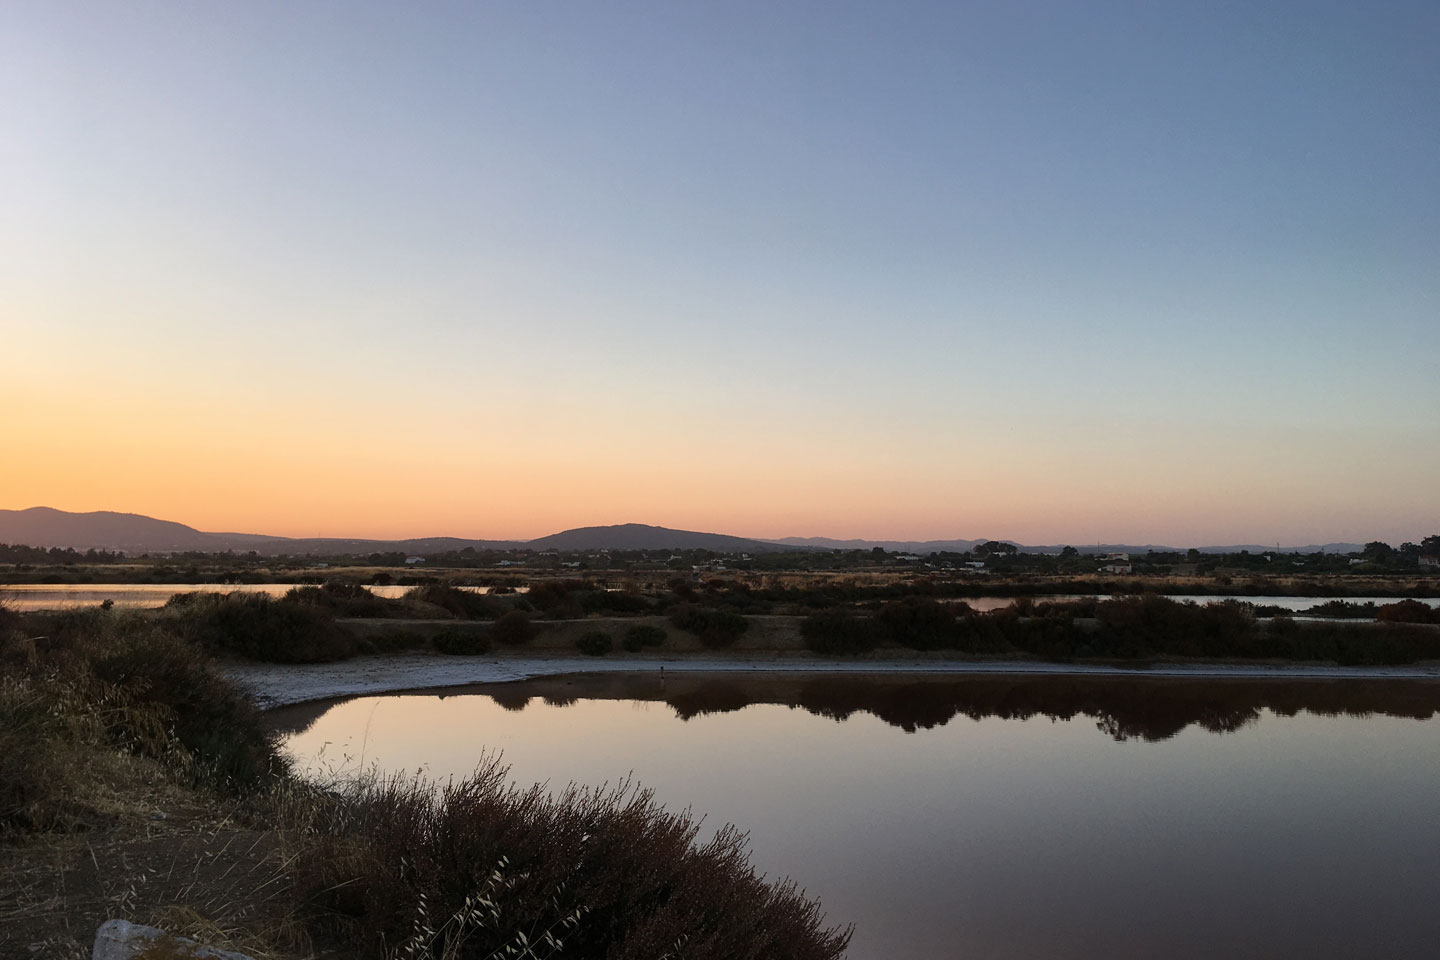 A view of the hills and salt pans behind Fuseta at sunset